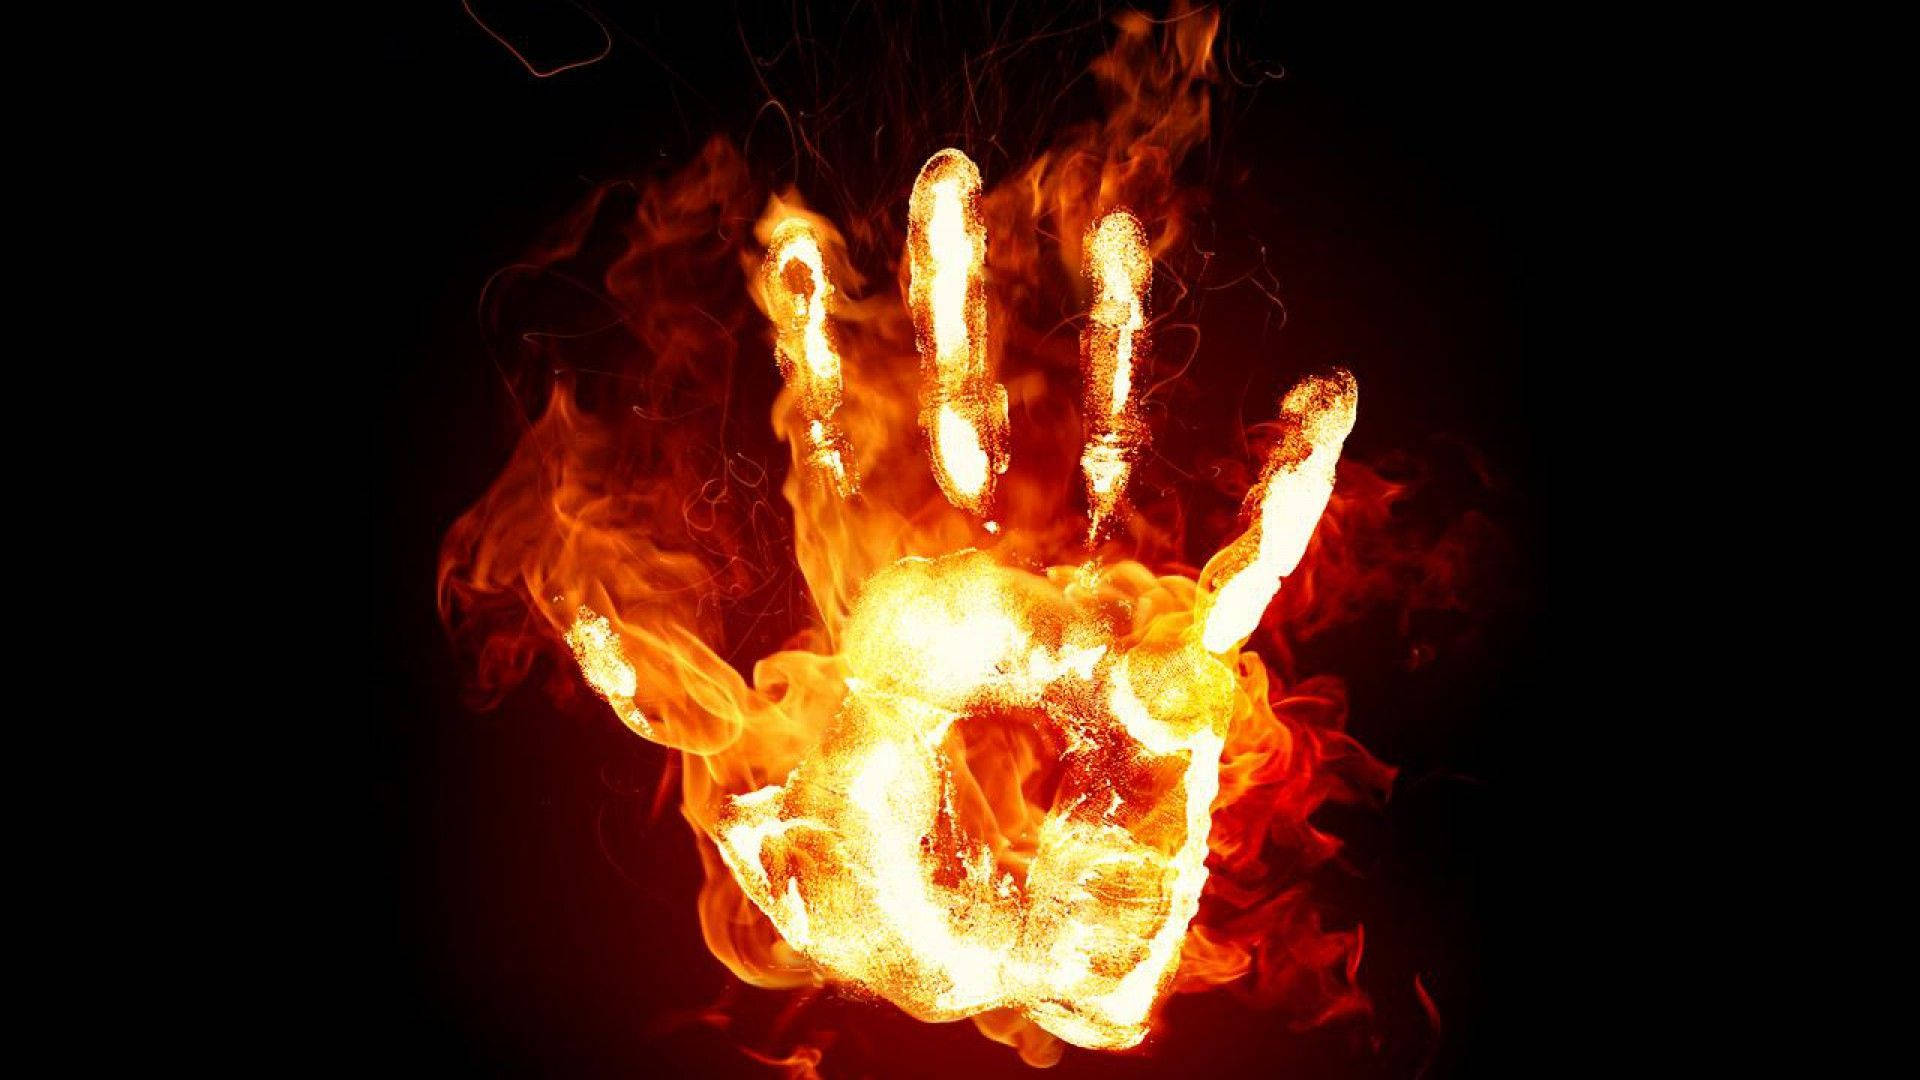 Fire Captured In One Hand Wallpaper